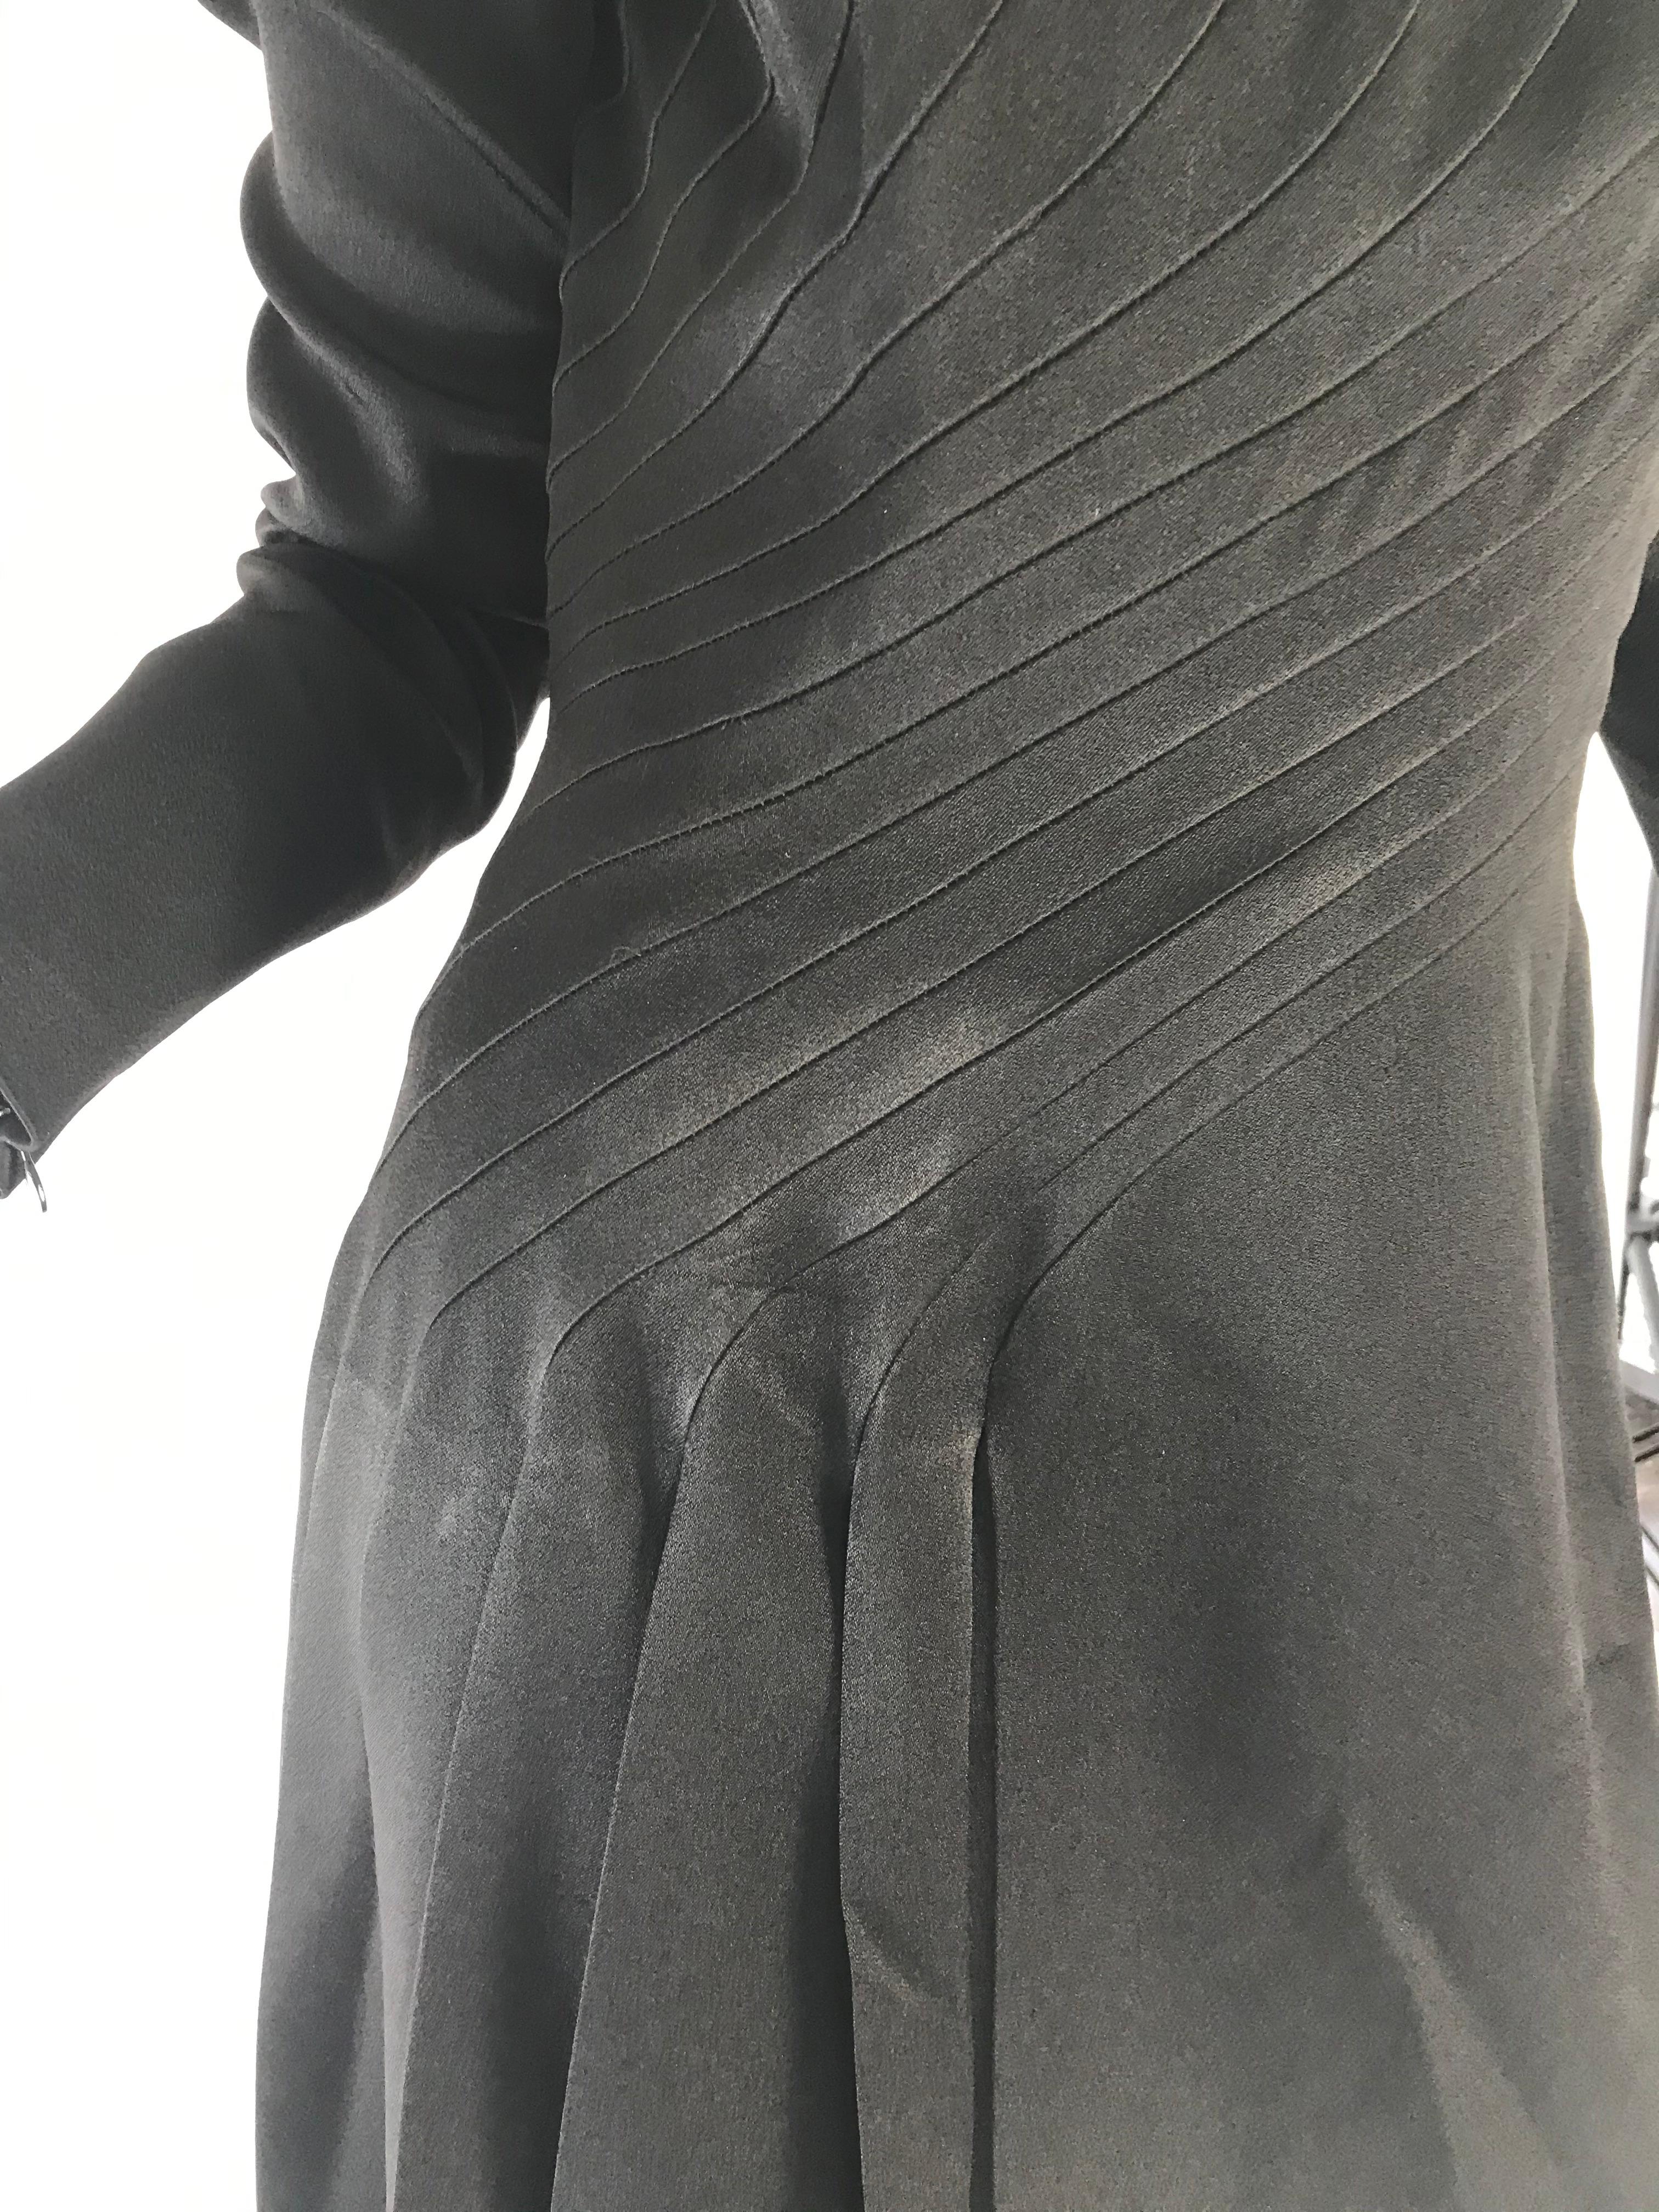 1990s black John Galliano dress with diagonal seams. 
Condition: Good, some all over wear
Size M ( mannequin is a US size 6 ) 